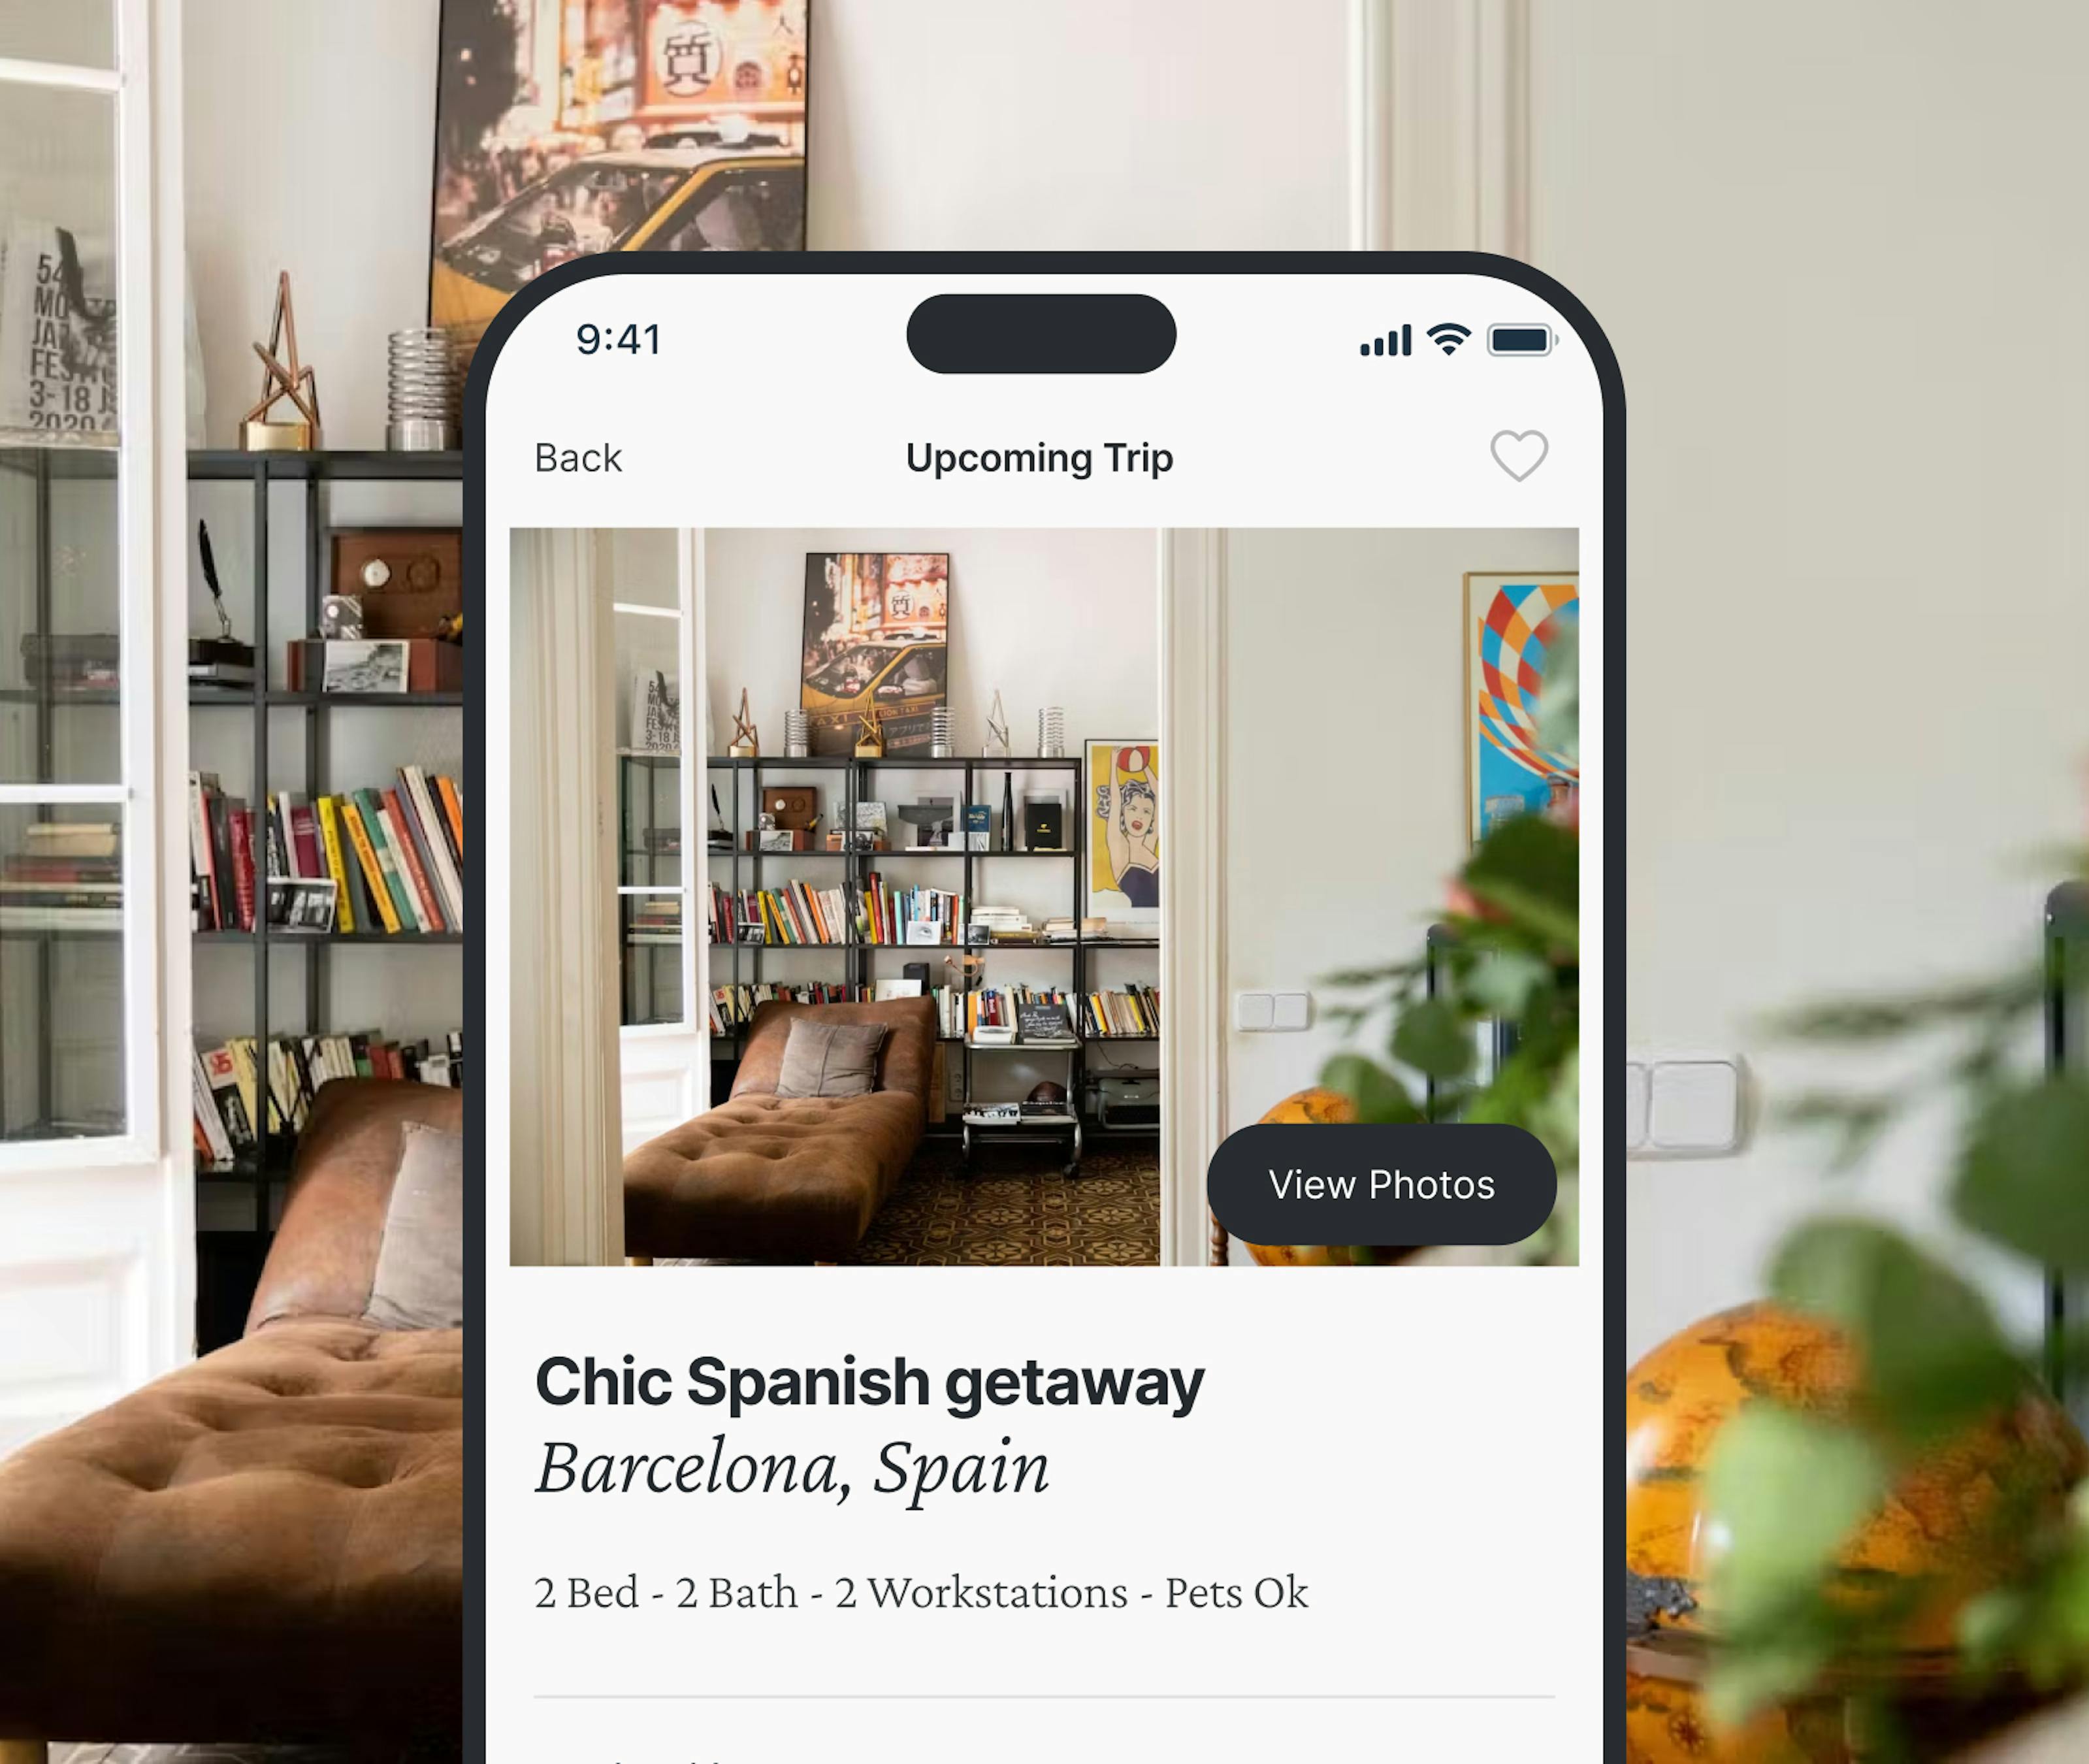 Interior of a Barcelona getaway showing on the Kindred app, where one credit per night lets you book from over 20,000+ homes worldwide.